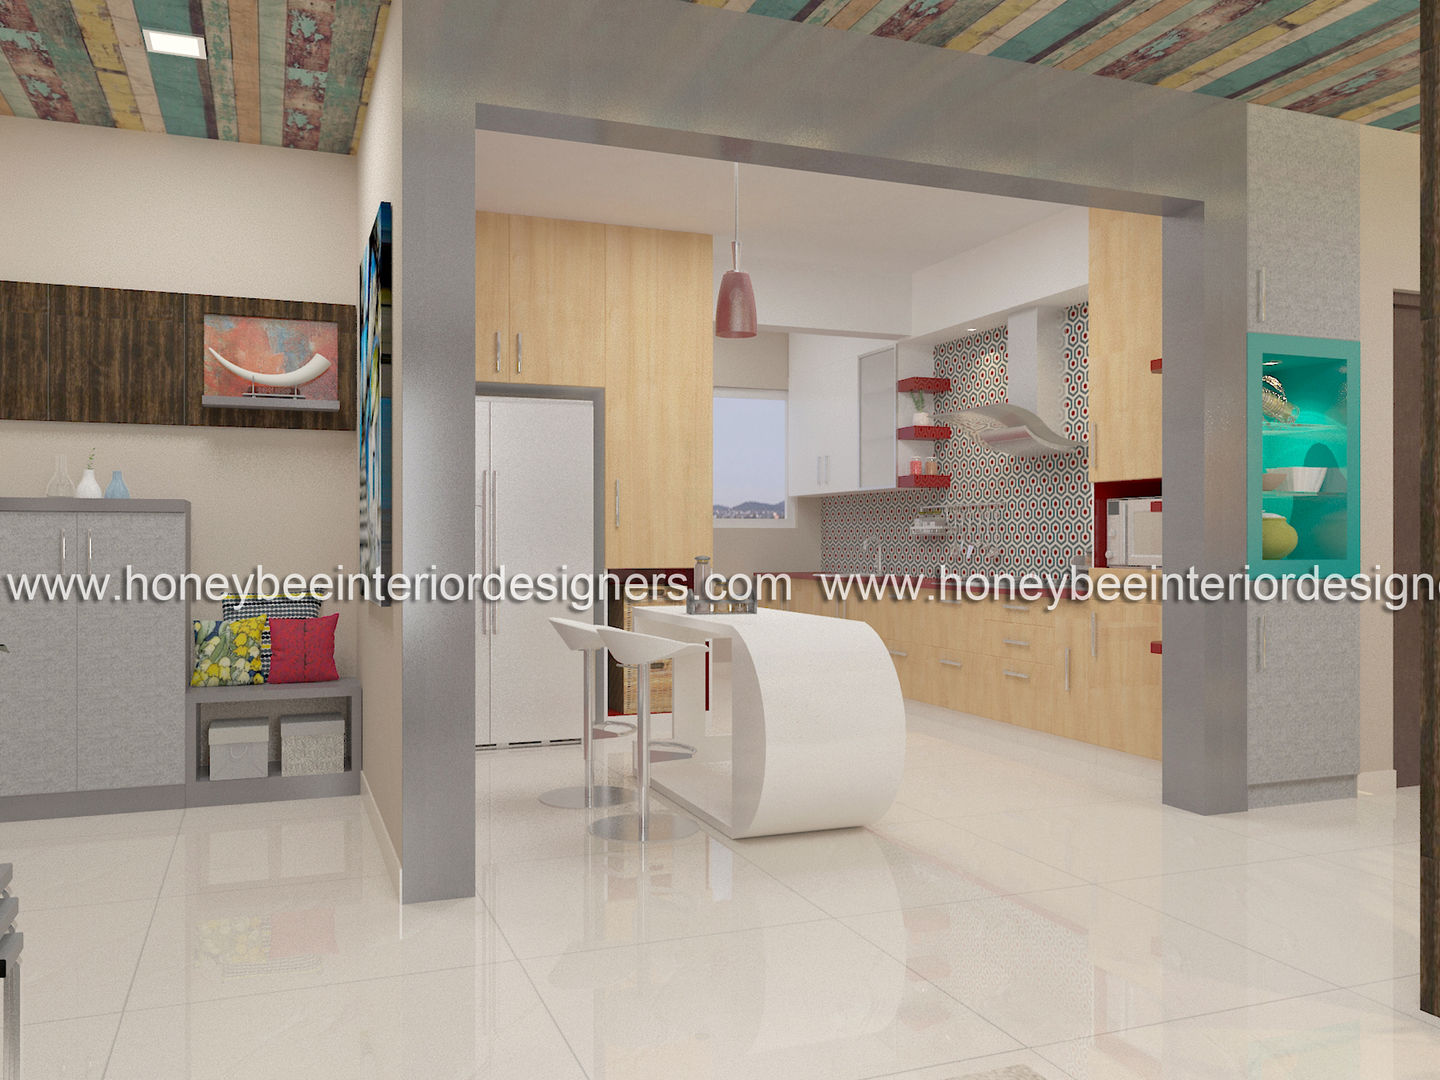 3 BHK Apartment for a young couple, Honeybee Interior Designers Honeybee Interior Designers Küchenzeile